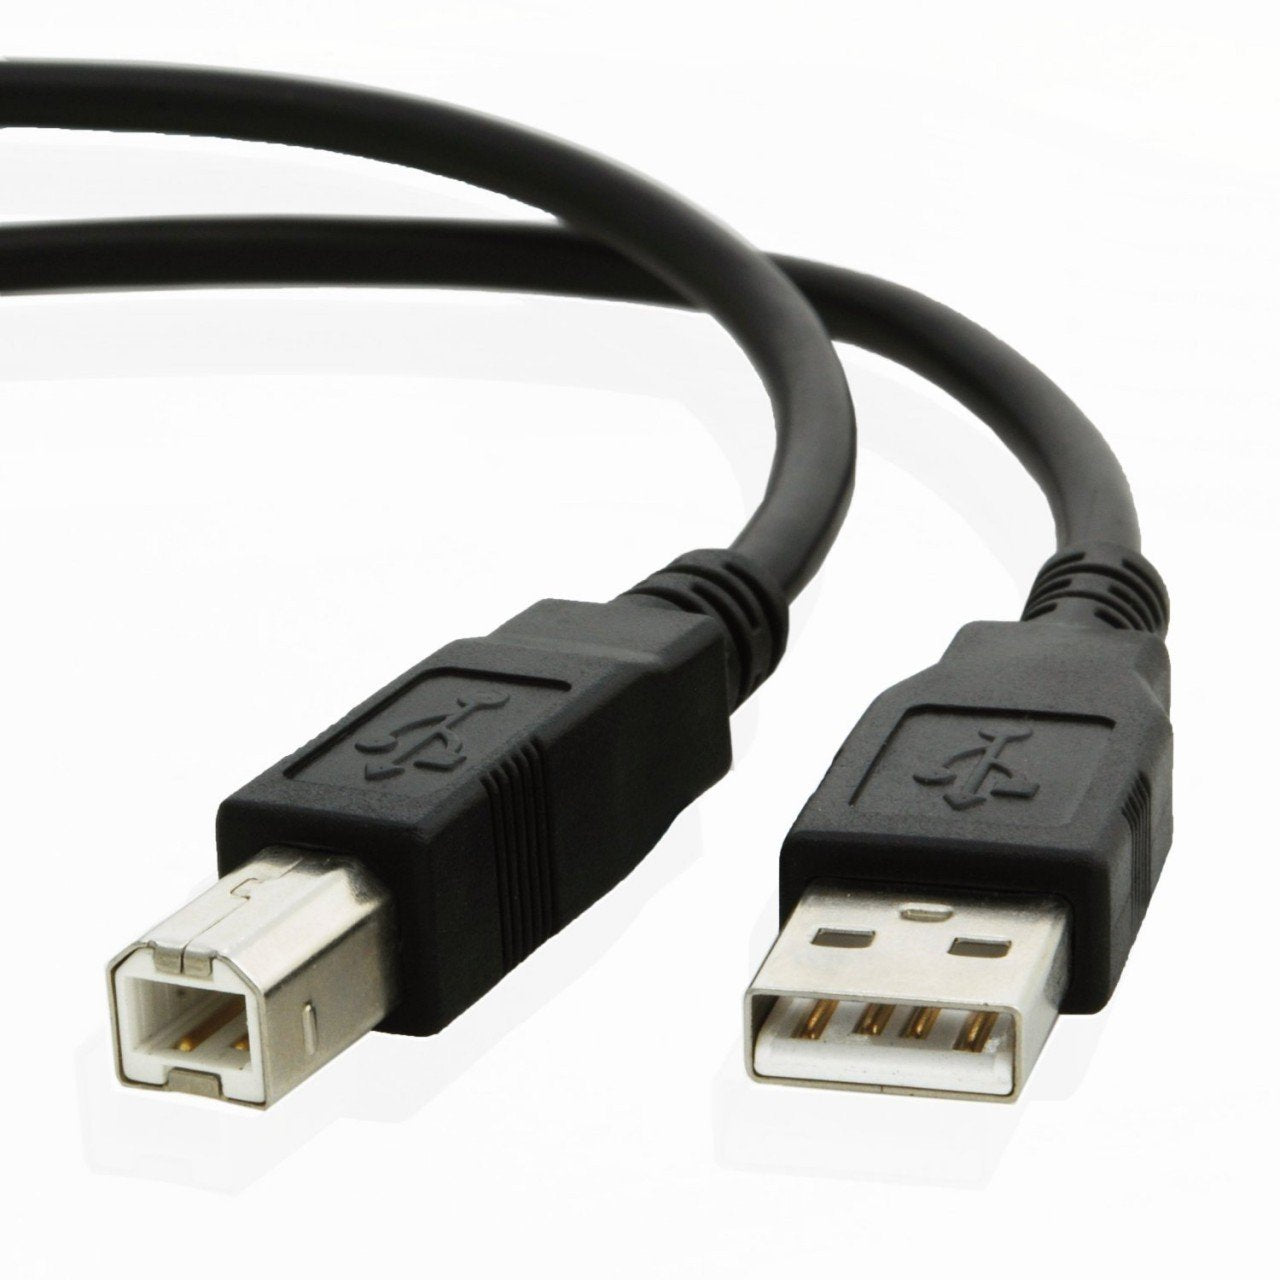 USB cable for Fujitsu SCANSNAP S1500